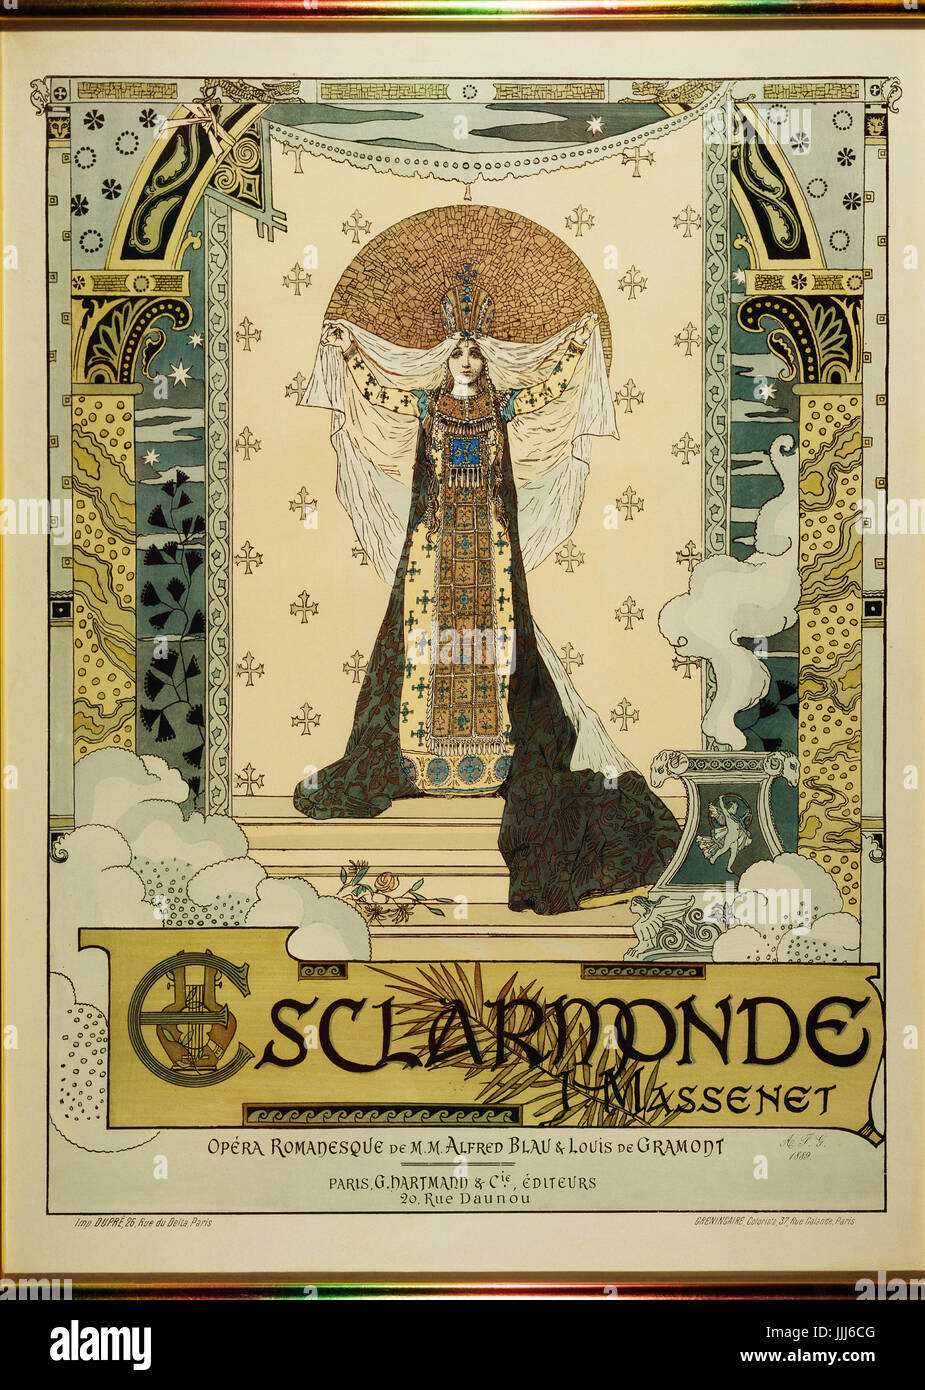 Esclarmonde, opera by Jules Massenet (12 May 1842 - 13 August 1912). 1899 Poster by Alfred Choubrac (1853-1902). Stock Photo